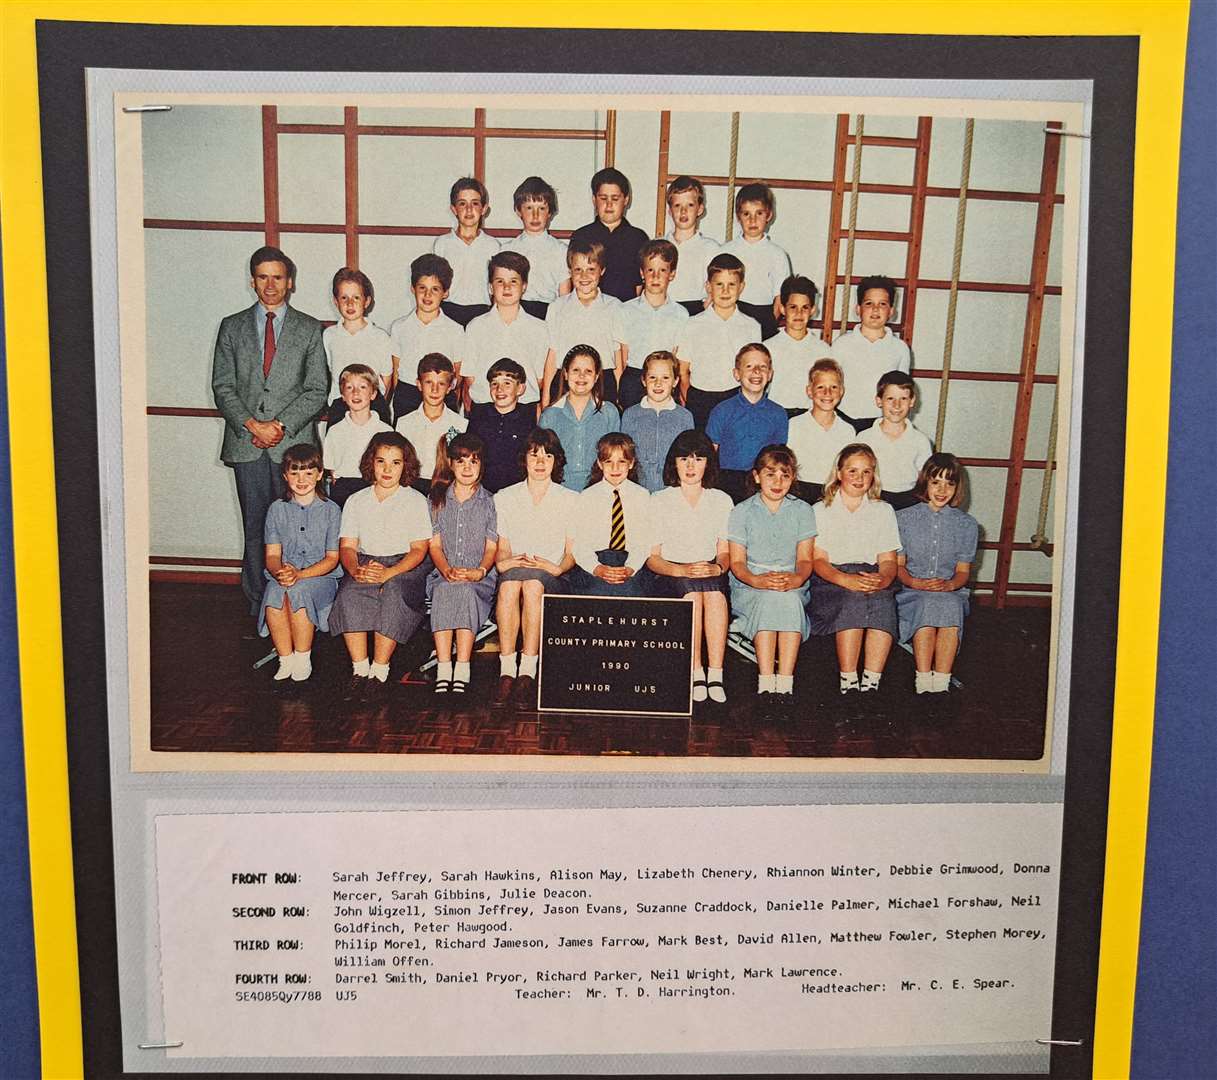 A class photo from 1990